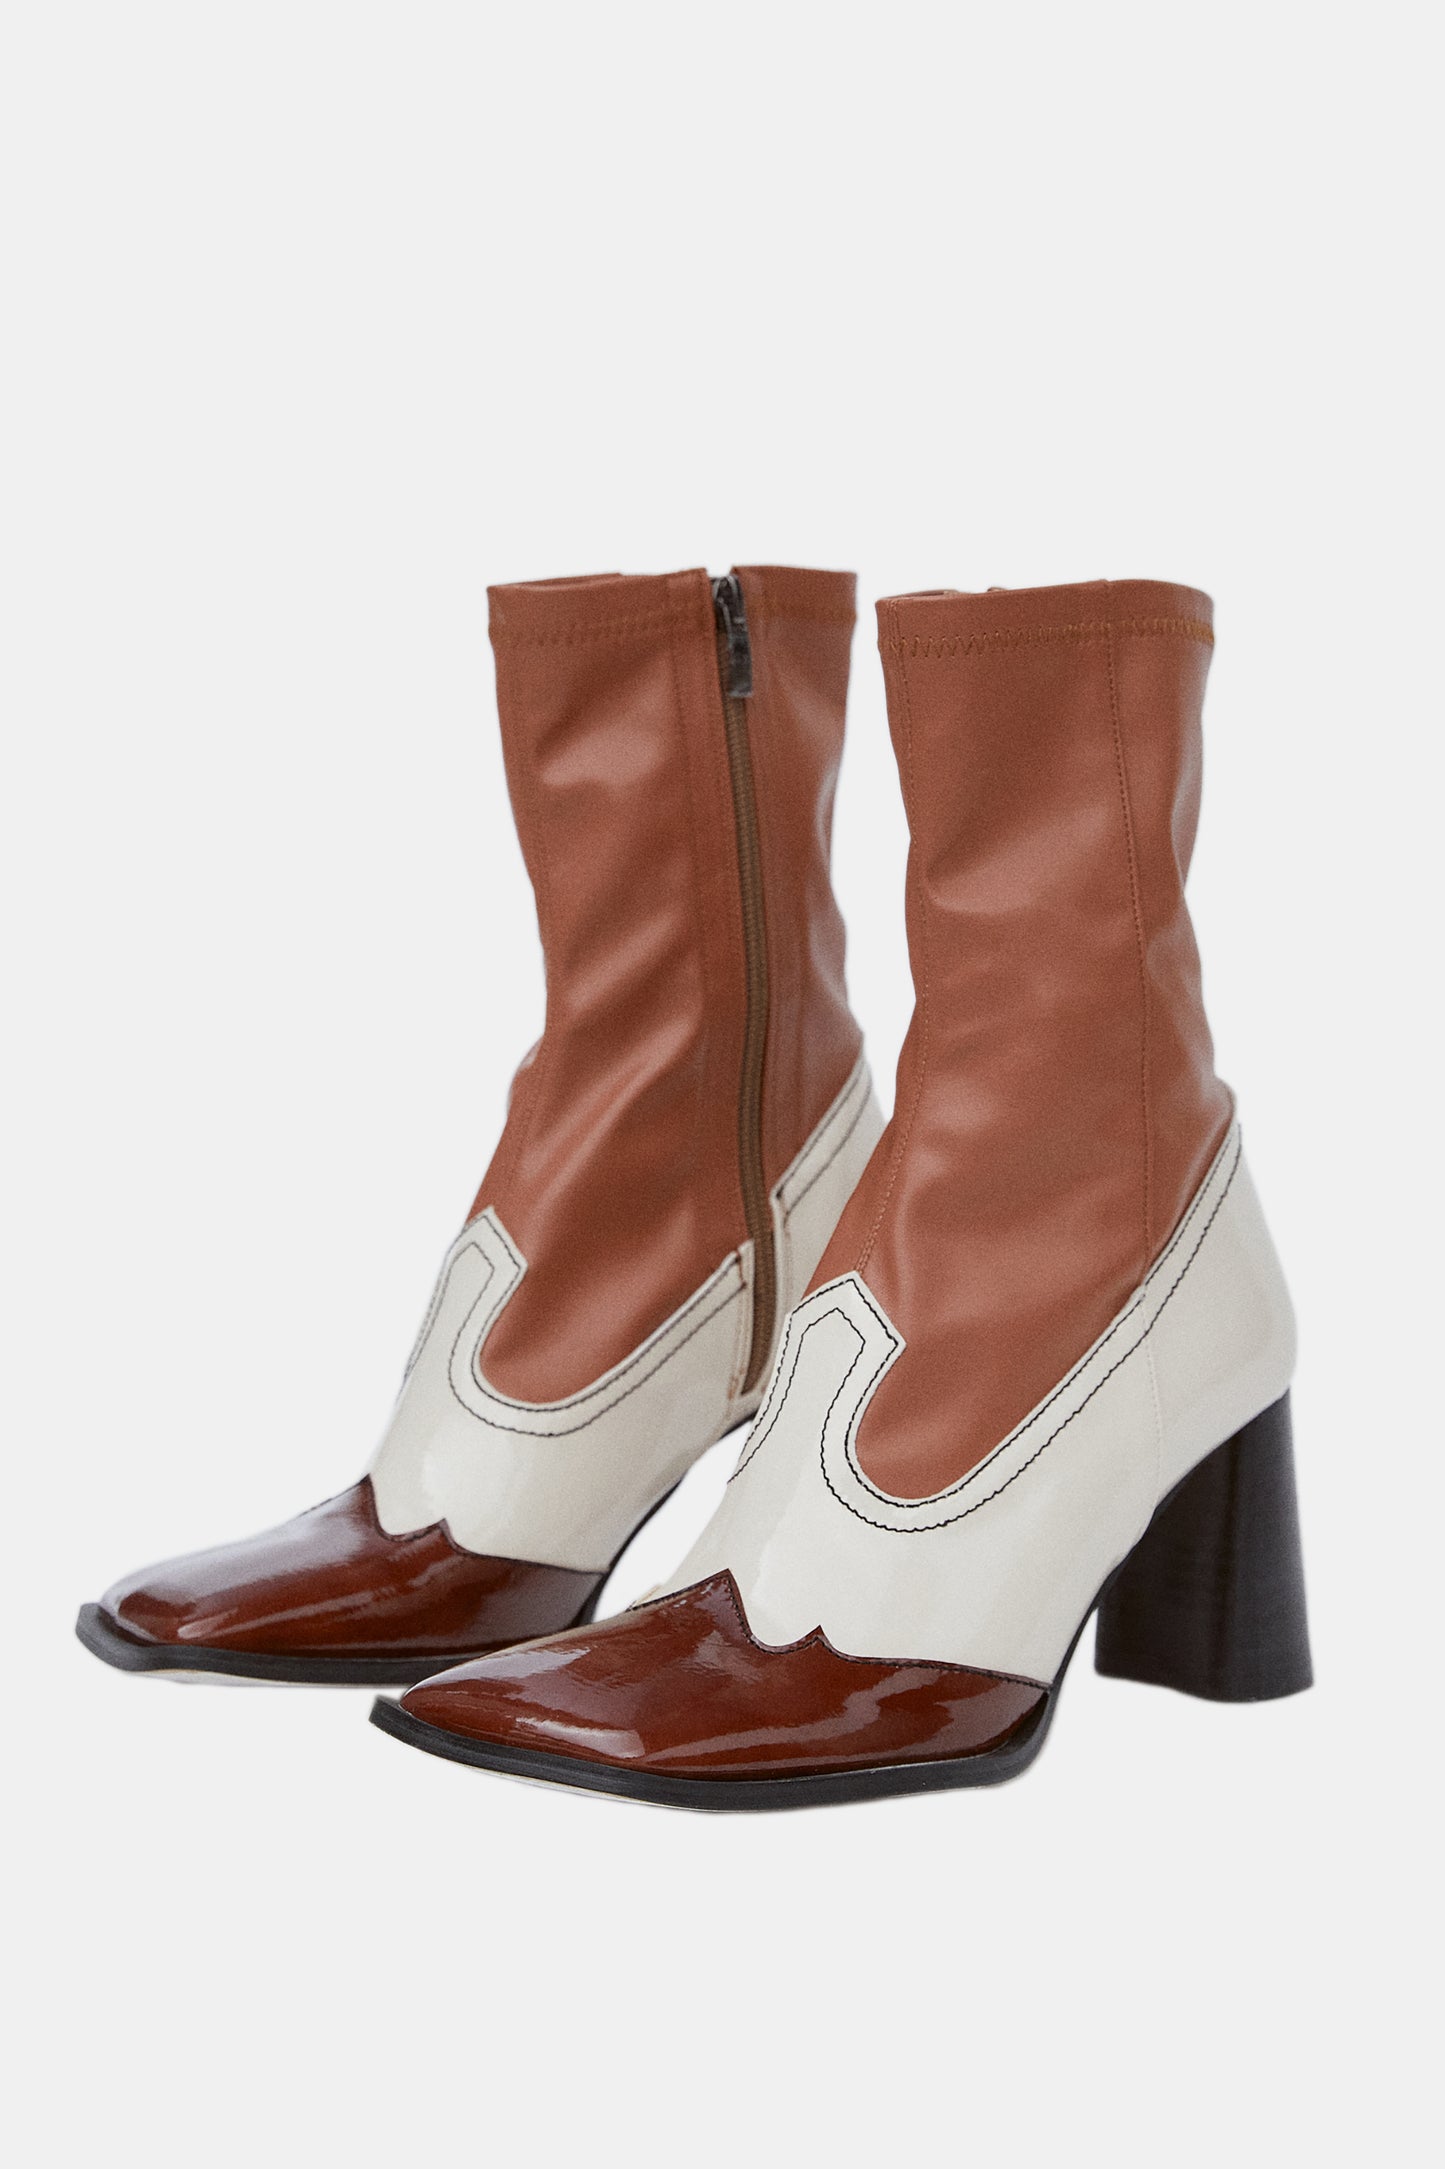 Two-Tone Cowboy Ankle Boots, Cinnamon/White